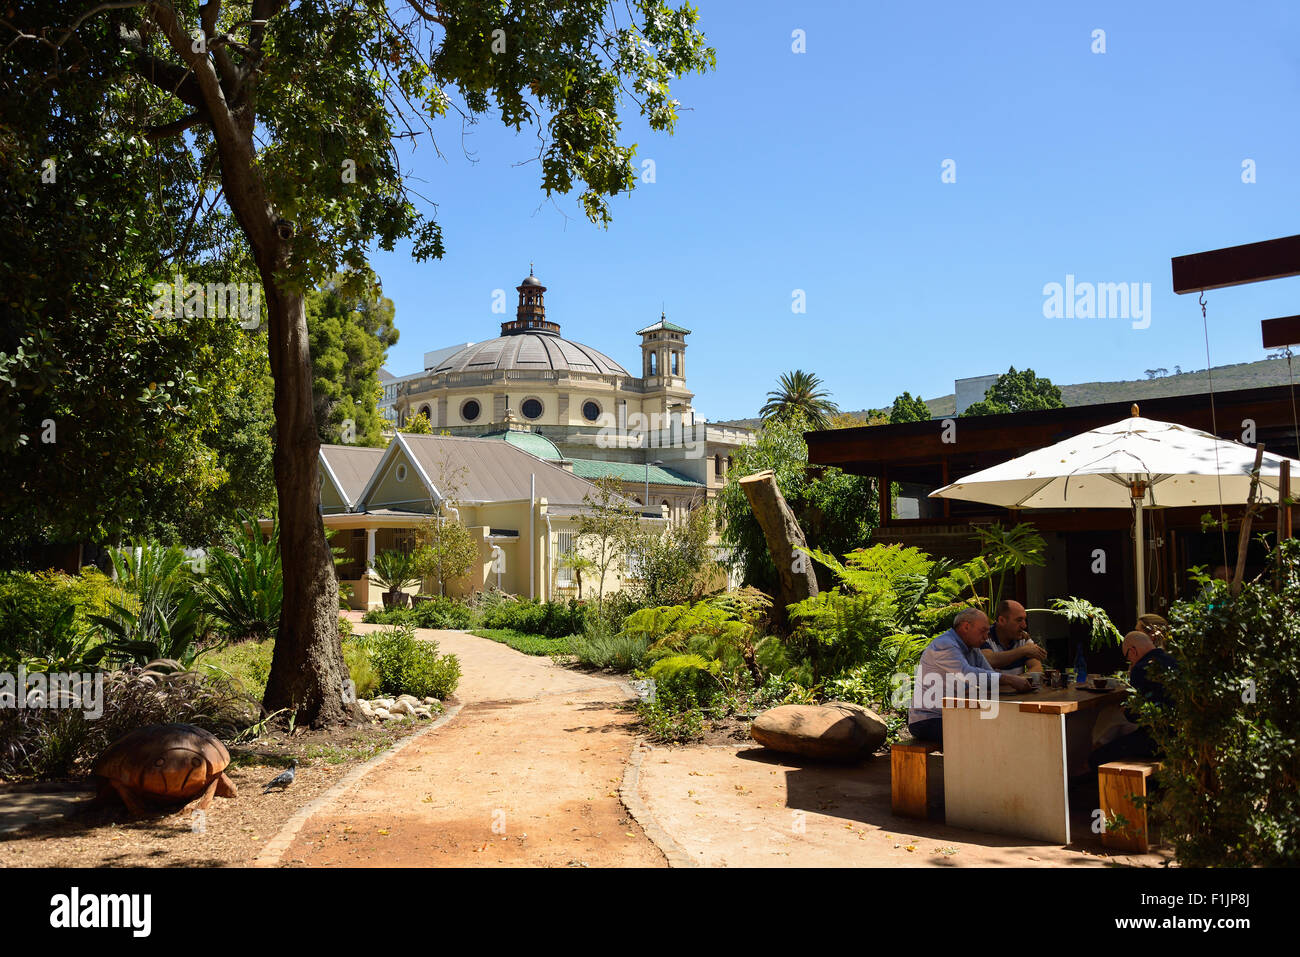 Centre for the Book and restaurant, The Public Garden, Cape Town, Western Cape Province, Republic of South Africa Stock Photo